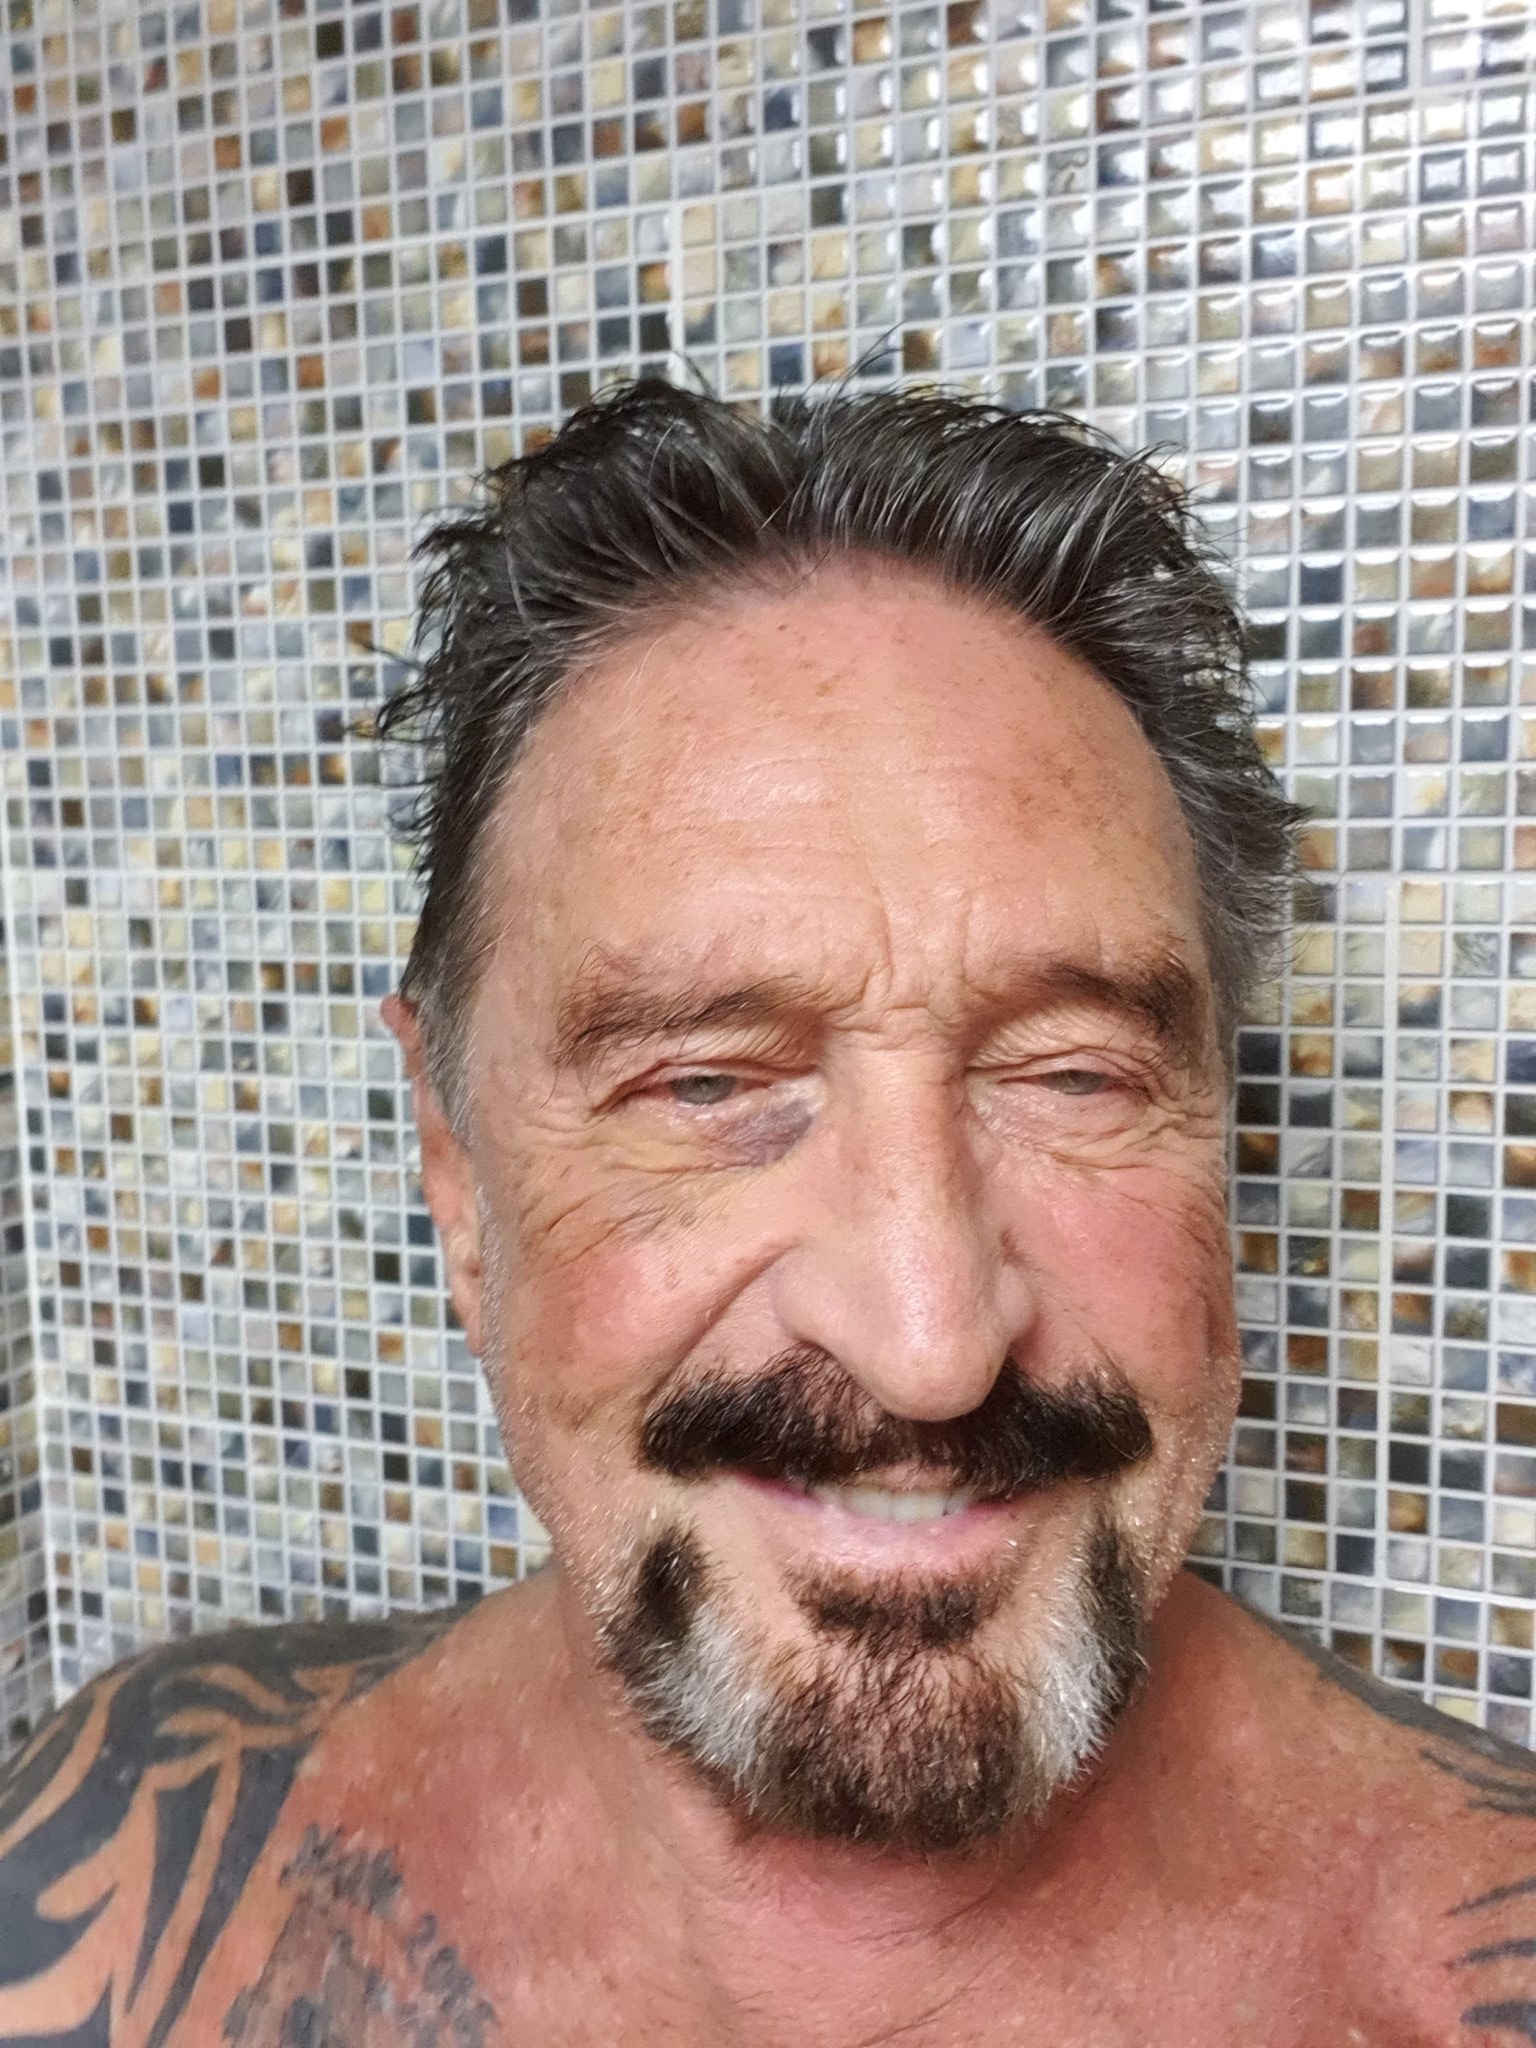 The Reason John McAfee Got Arrested in Europe Yesterday